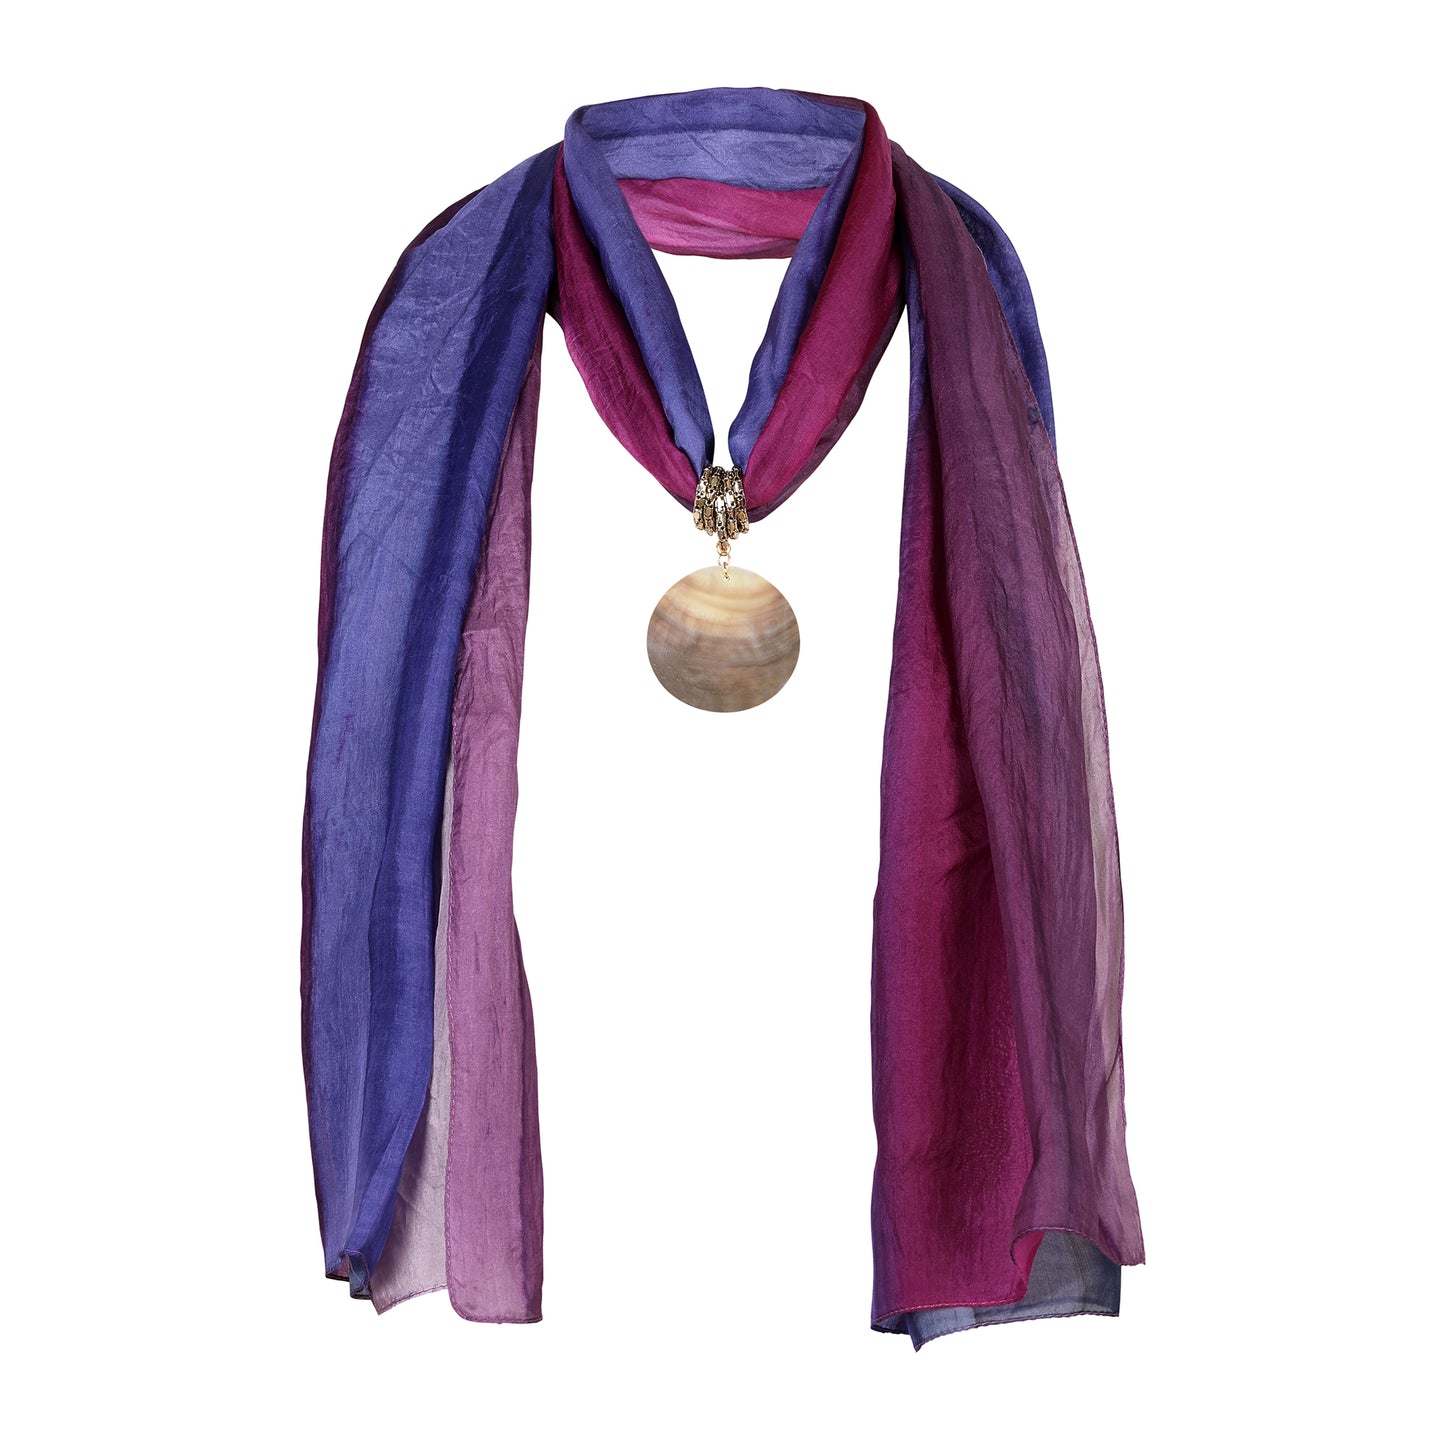 Bdiva Purple-Pink Ombre Pure Silk Scarf With Natural Stone.